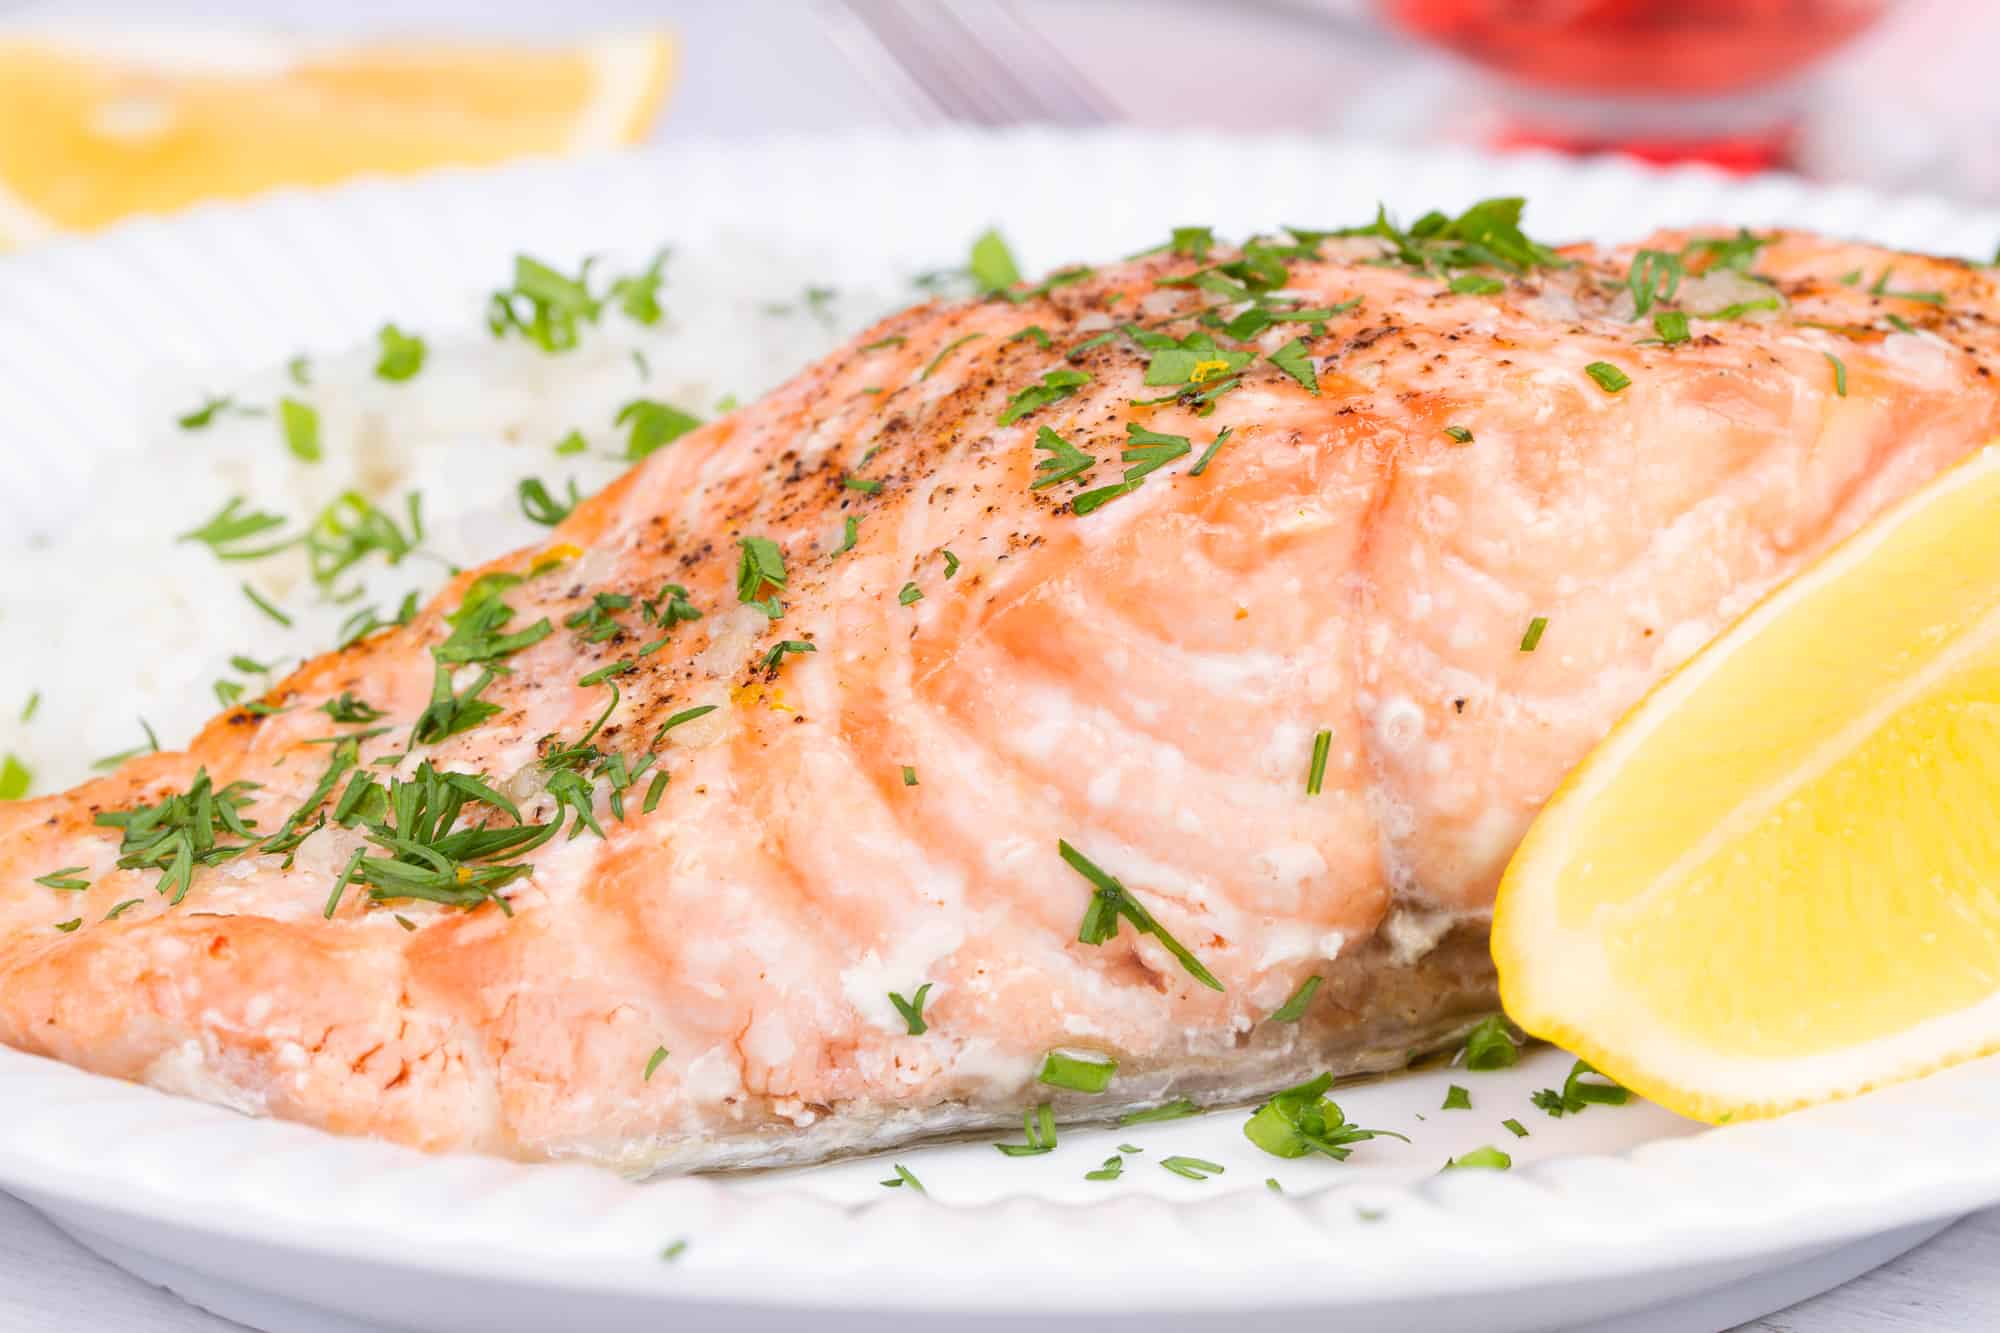 Salmon provides many health benefits and it tastes amazing. FInd out more and grab our delicious and easy salmon recipes at Made in a Pinch